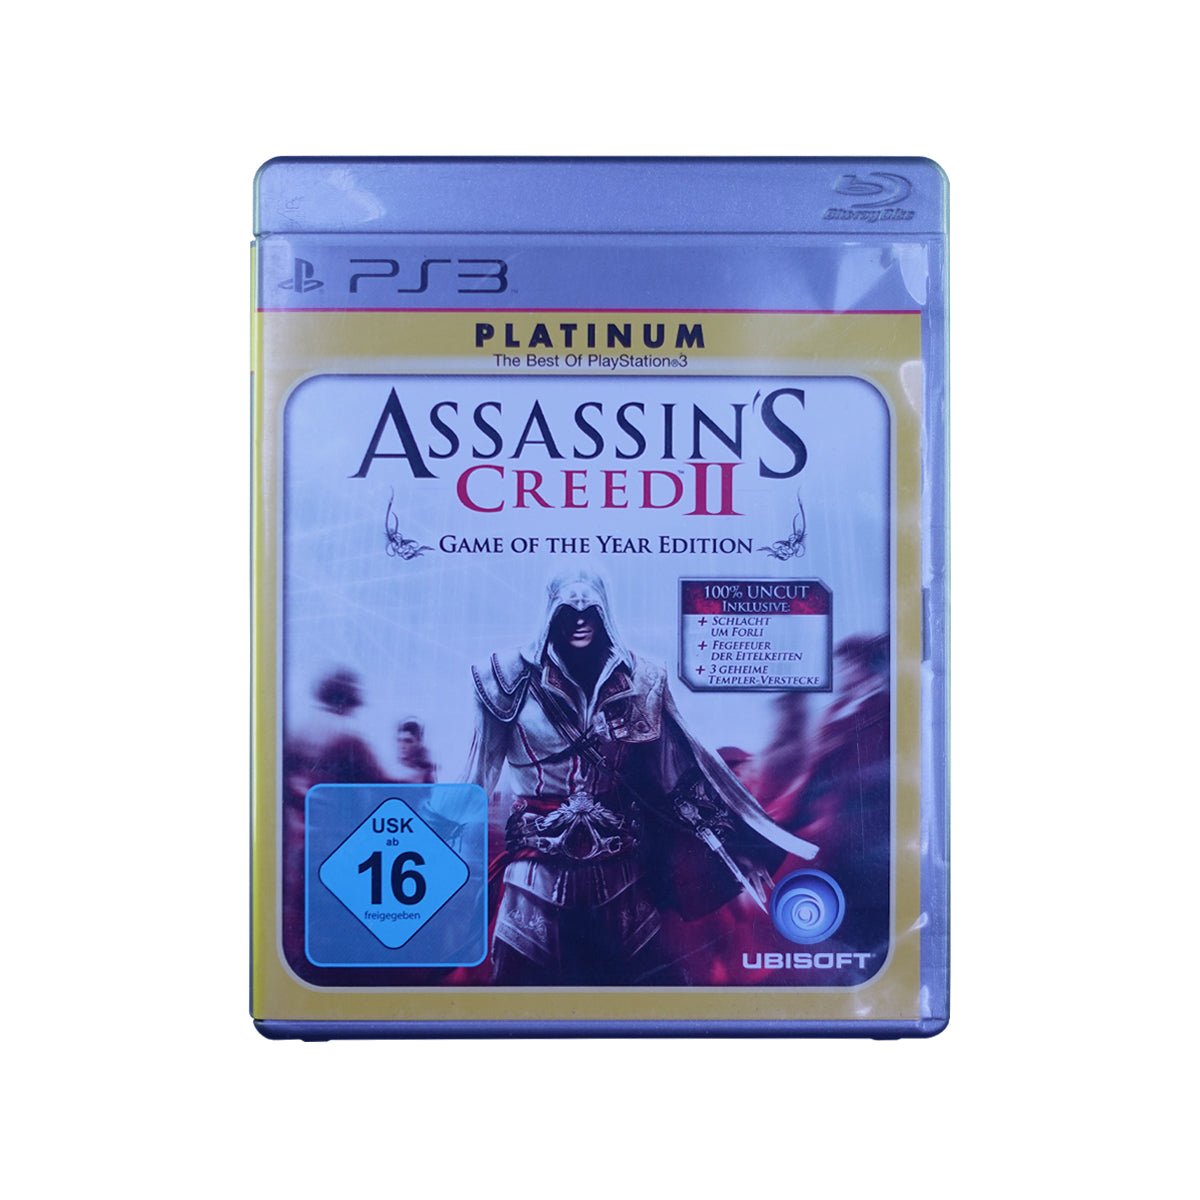 (Pre-Owned) Assassin's Creed II Game Of The Year Edition - PlayStation 3 - ريترو - Store 974 | ستور ٩٧٤